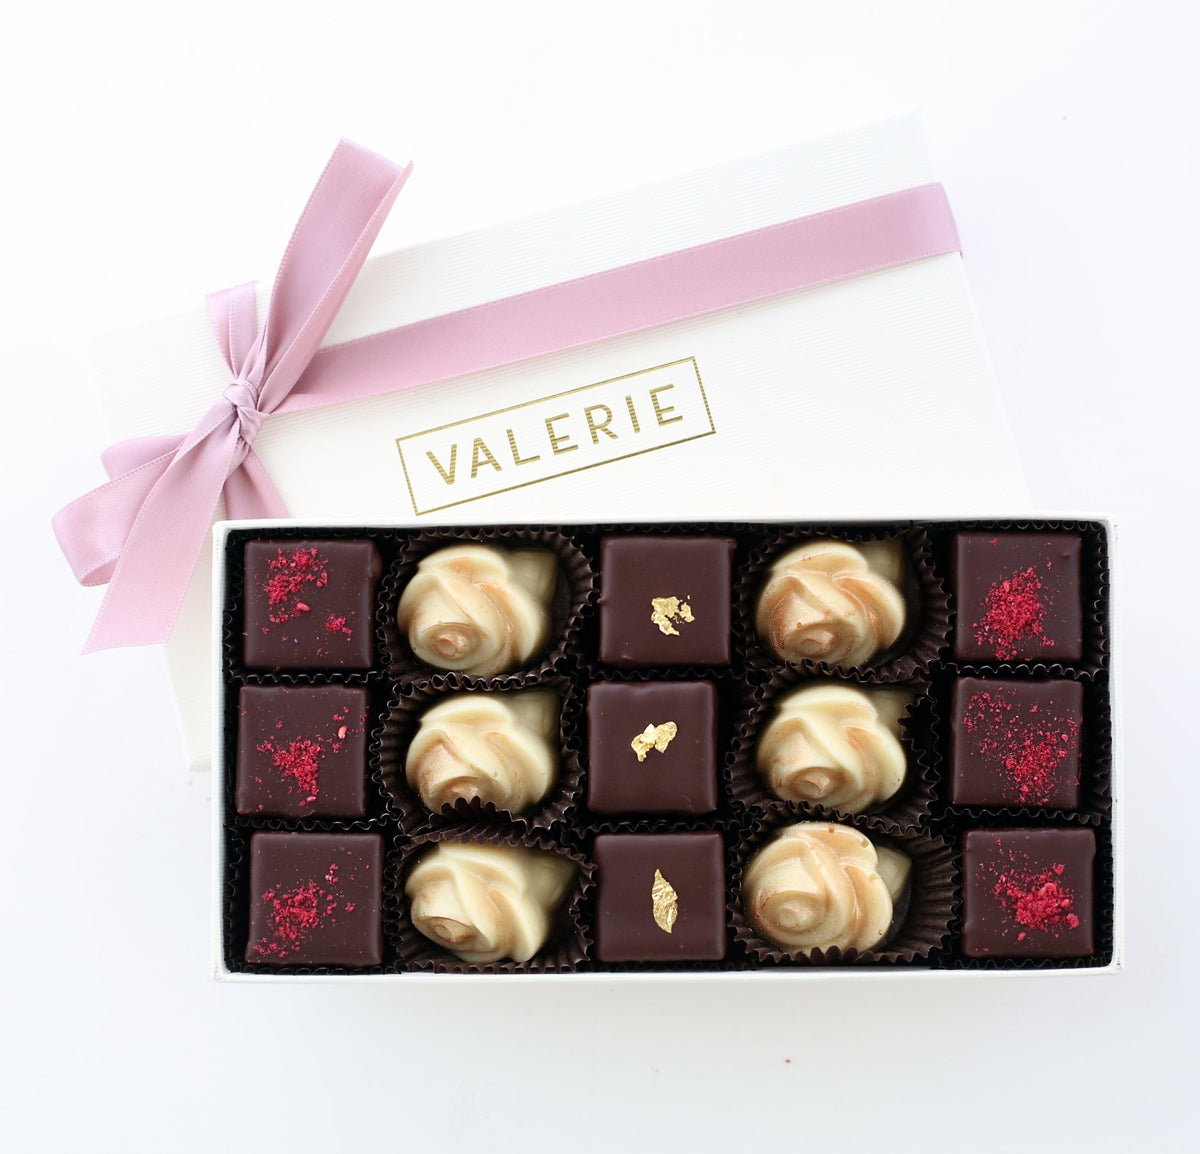 Assortment of chocolates in an ivory box with a violet satin ribbon and &quot;VALERIE&quot; written on the lid.